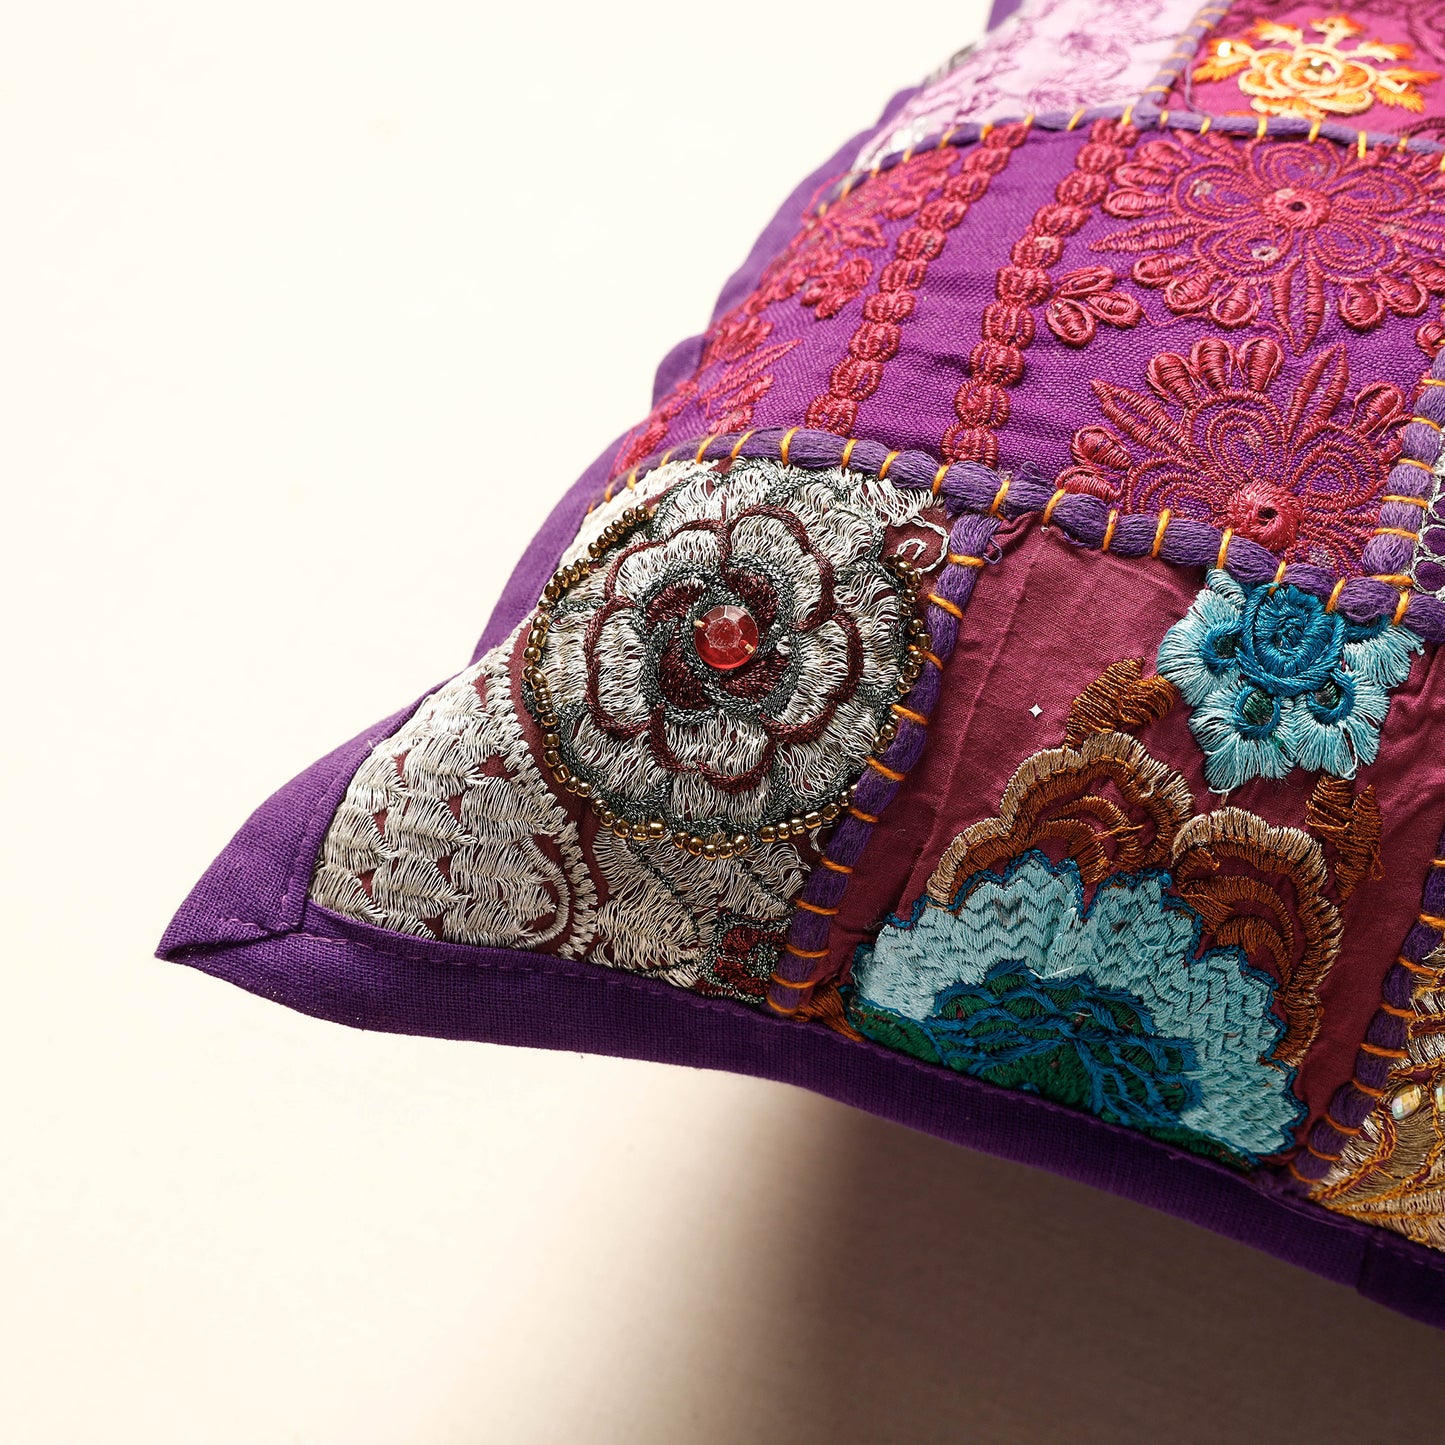 patchwork pillow cover